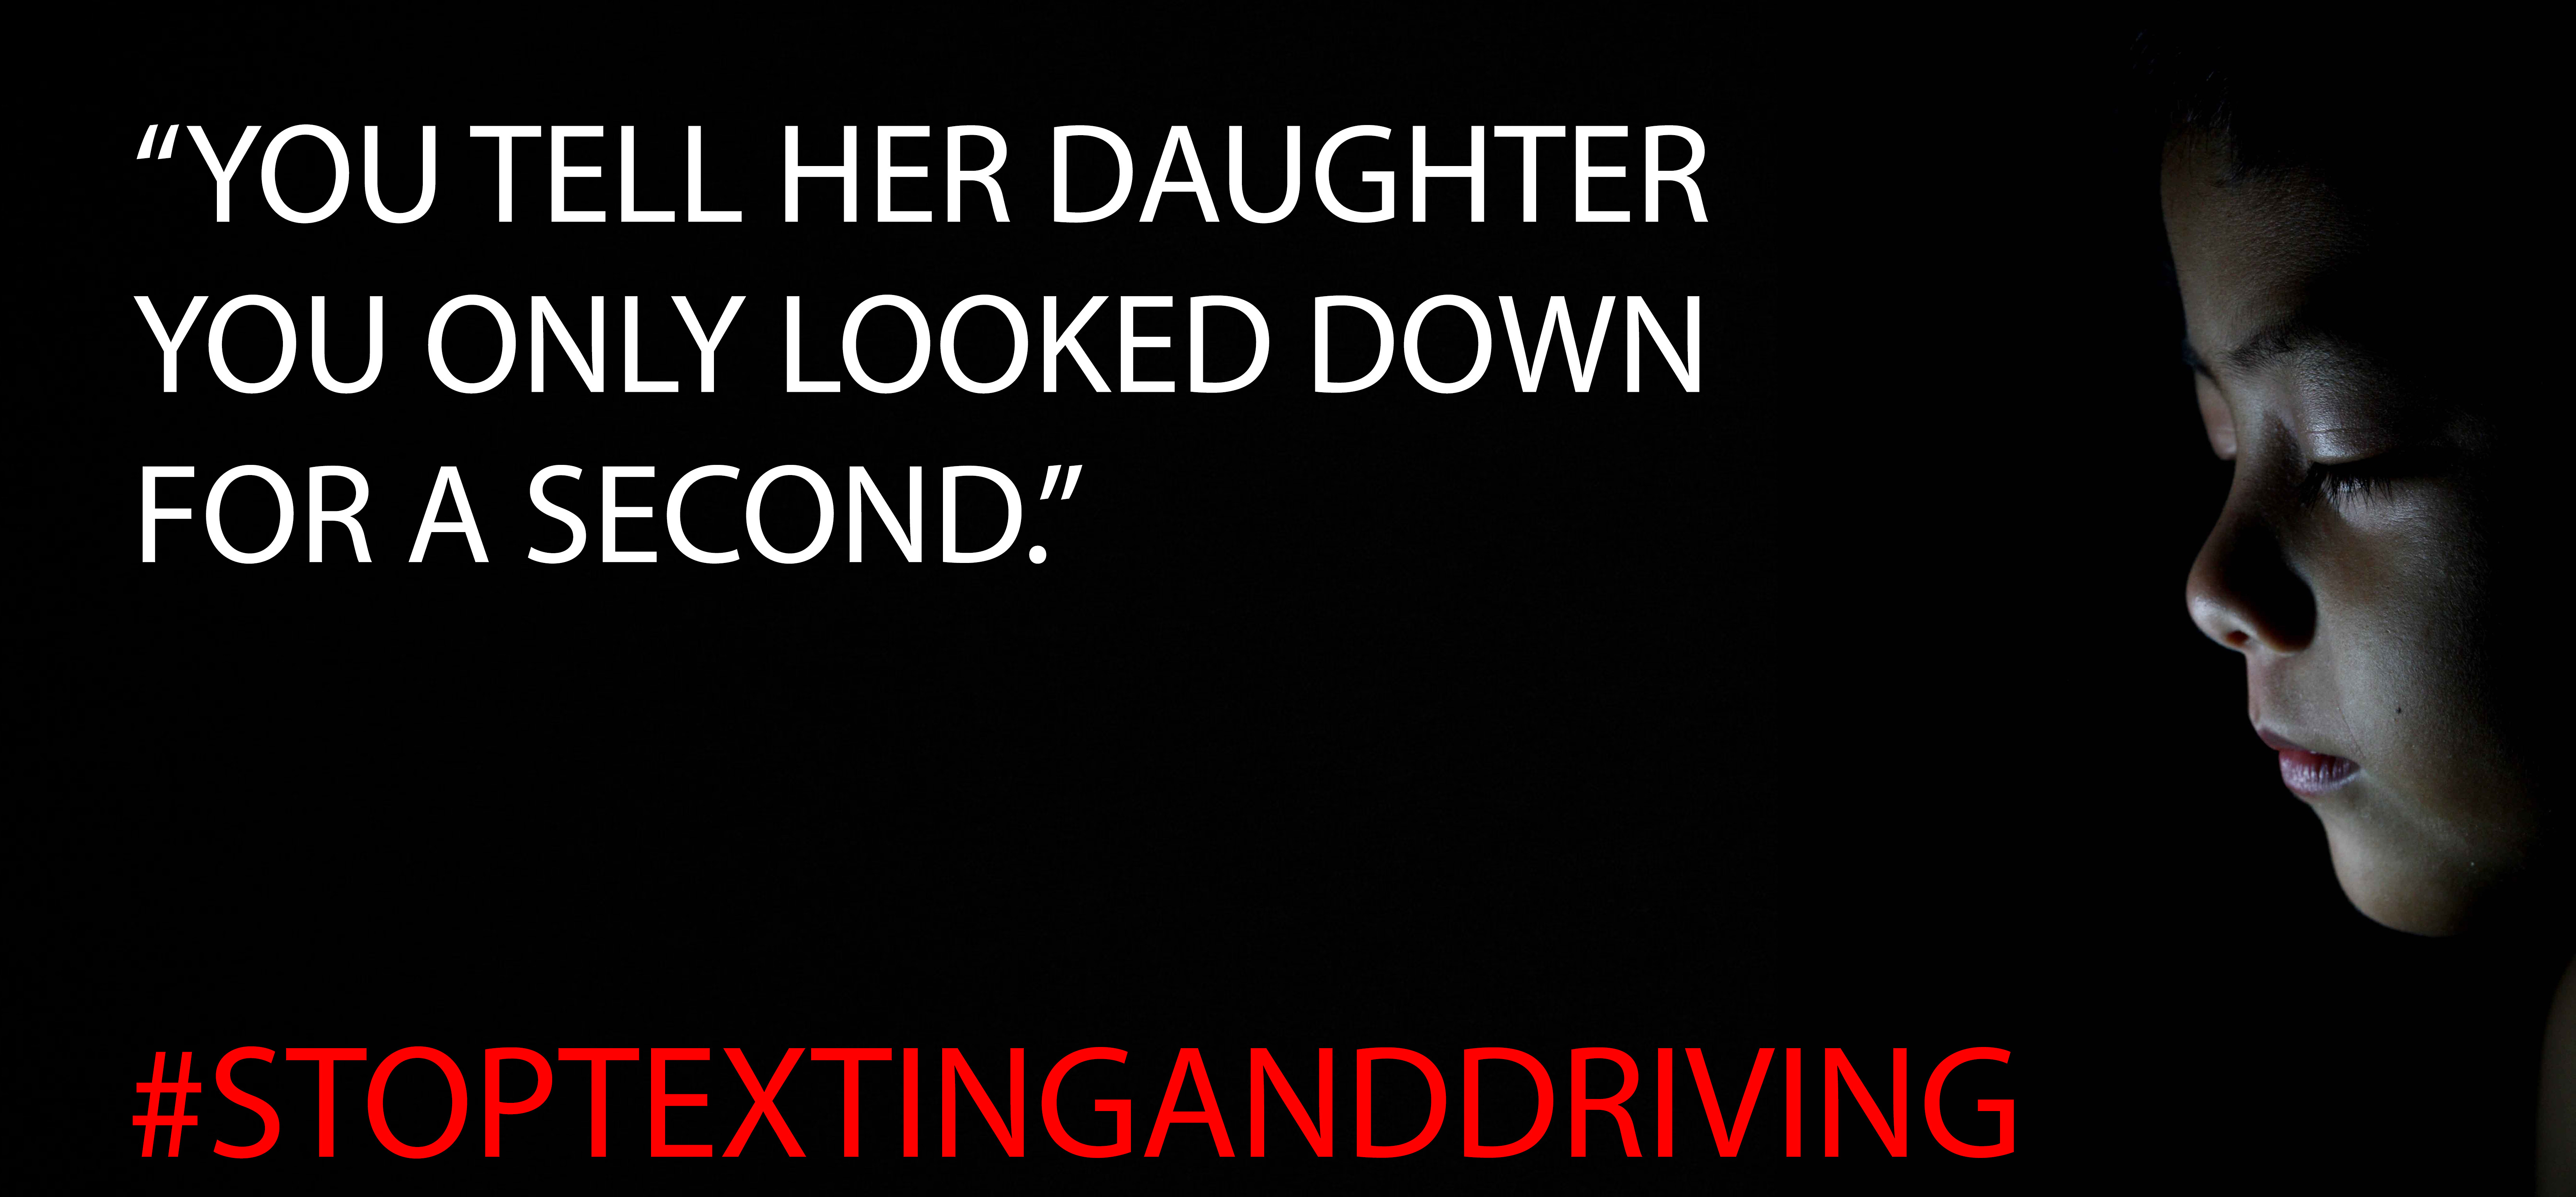 a child looking down upon text that says "you tell her daughter you only looked down for a second. #stoptextinganddriving"